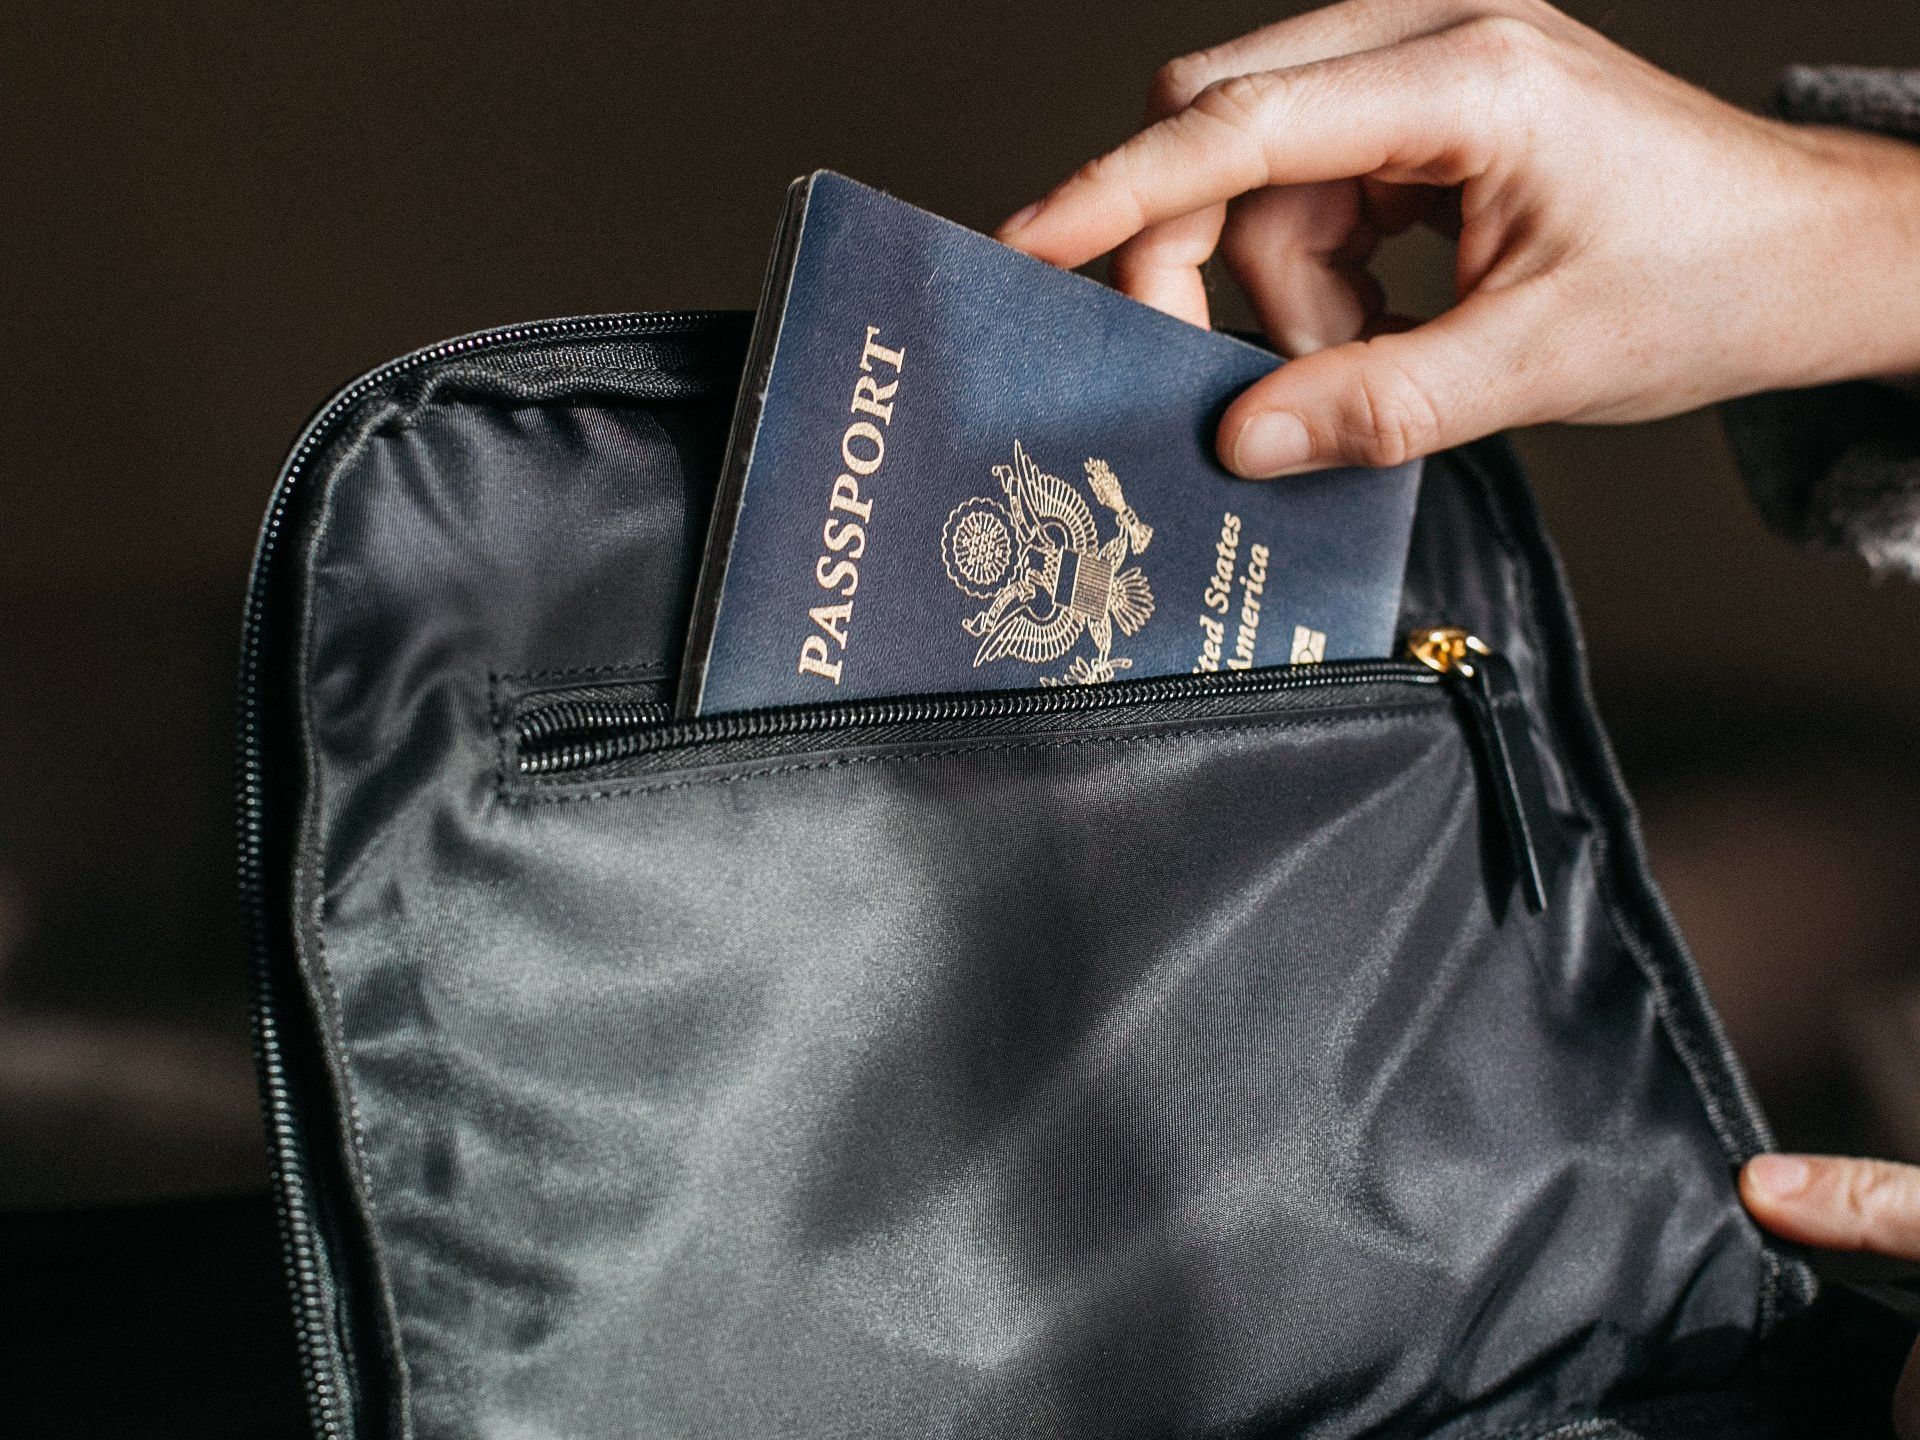 a person is putting a passport into a black bag